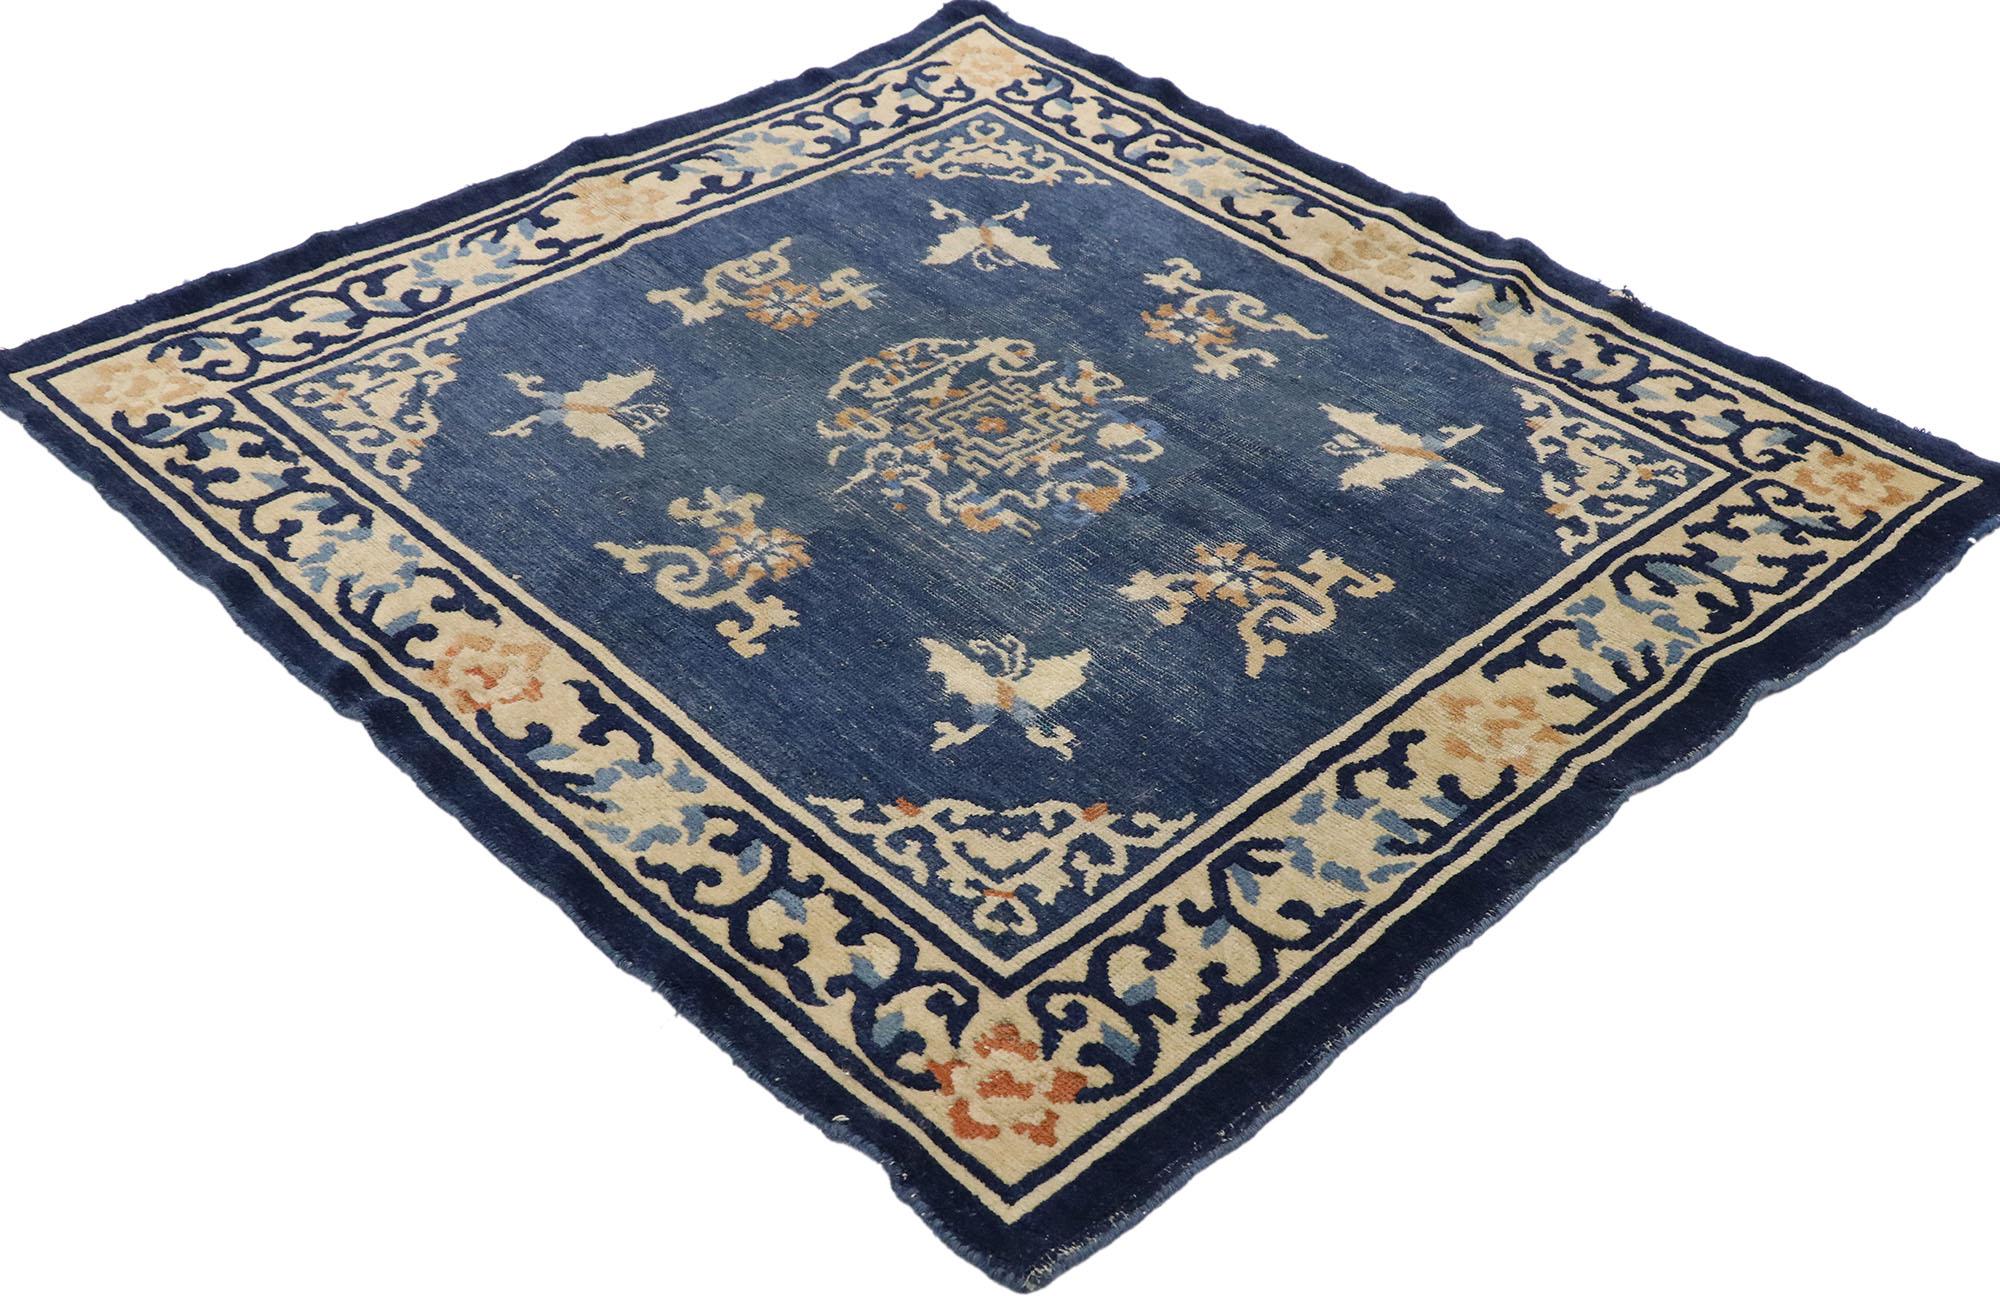 77561, distressed antique Chinese Peking rug with Romantic chinoiserie style1. This hand knotted wool distressed antique Chinese Peking rug features a rounded open center medallion floating on an abrashed blue field. The medallion is comprised of a